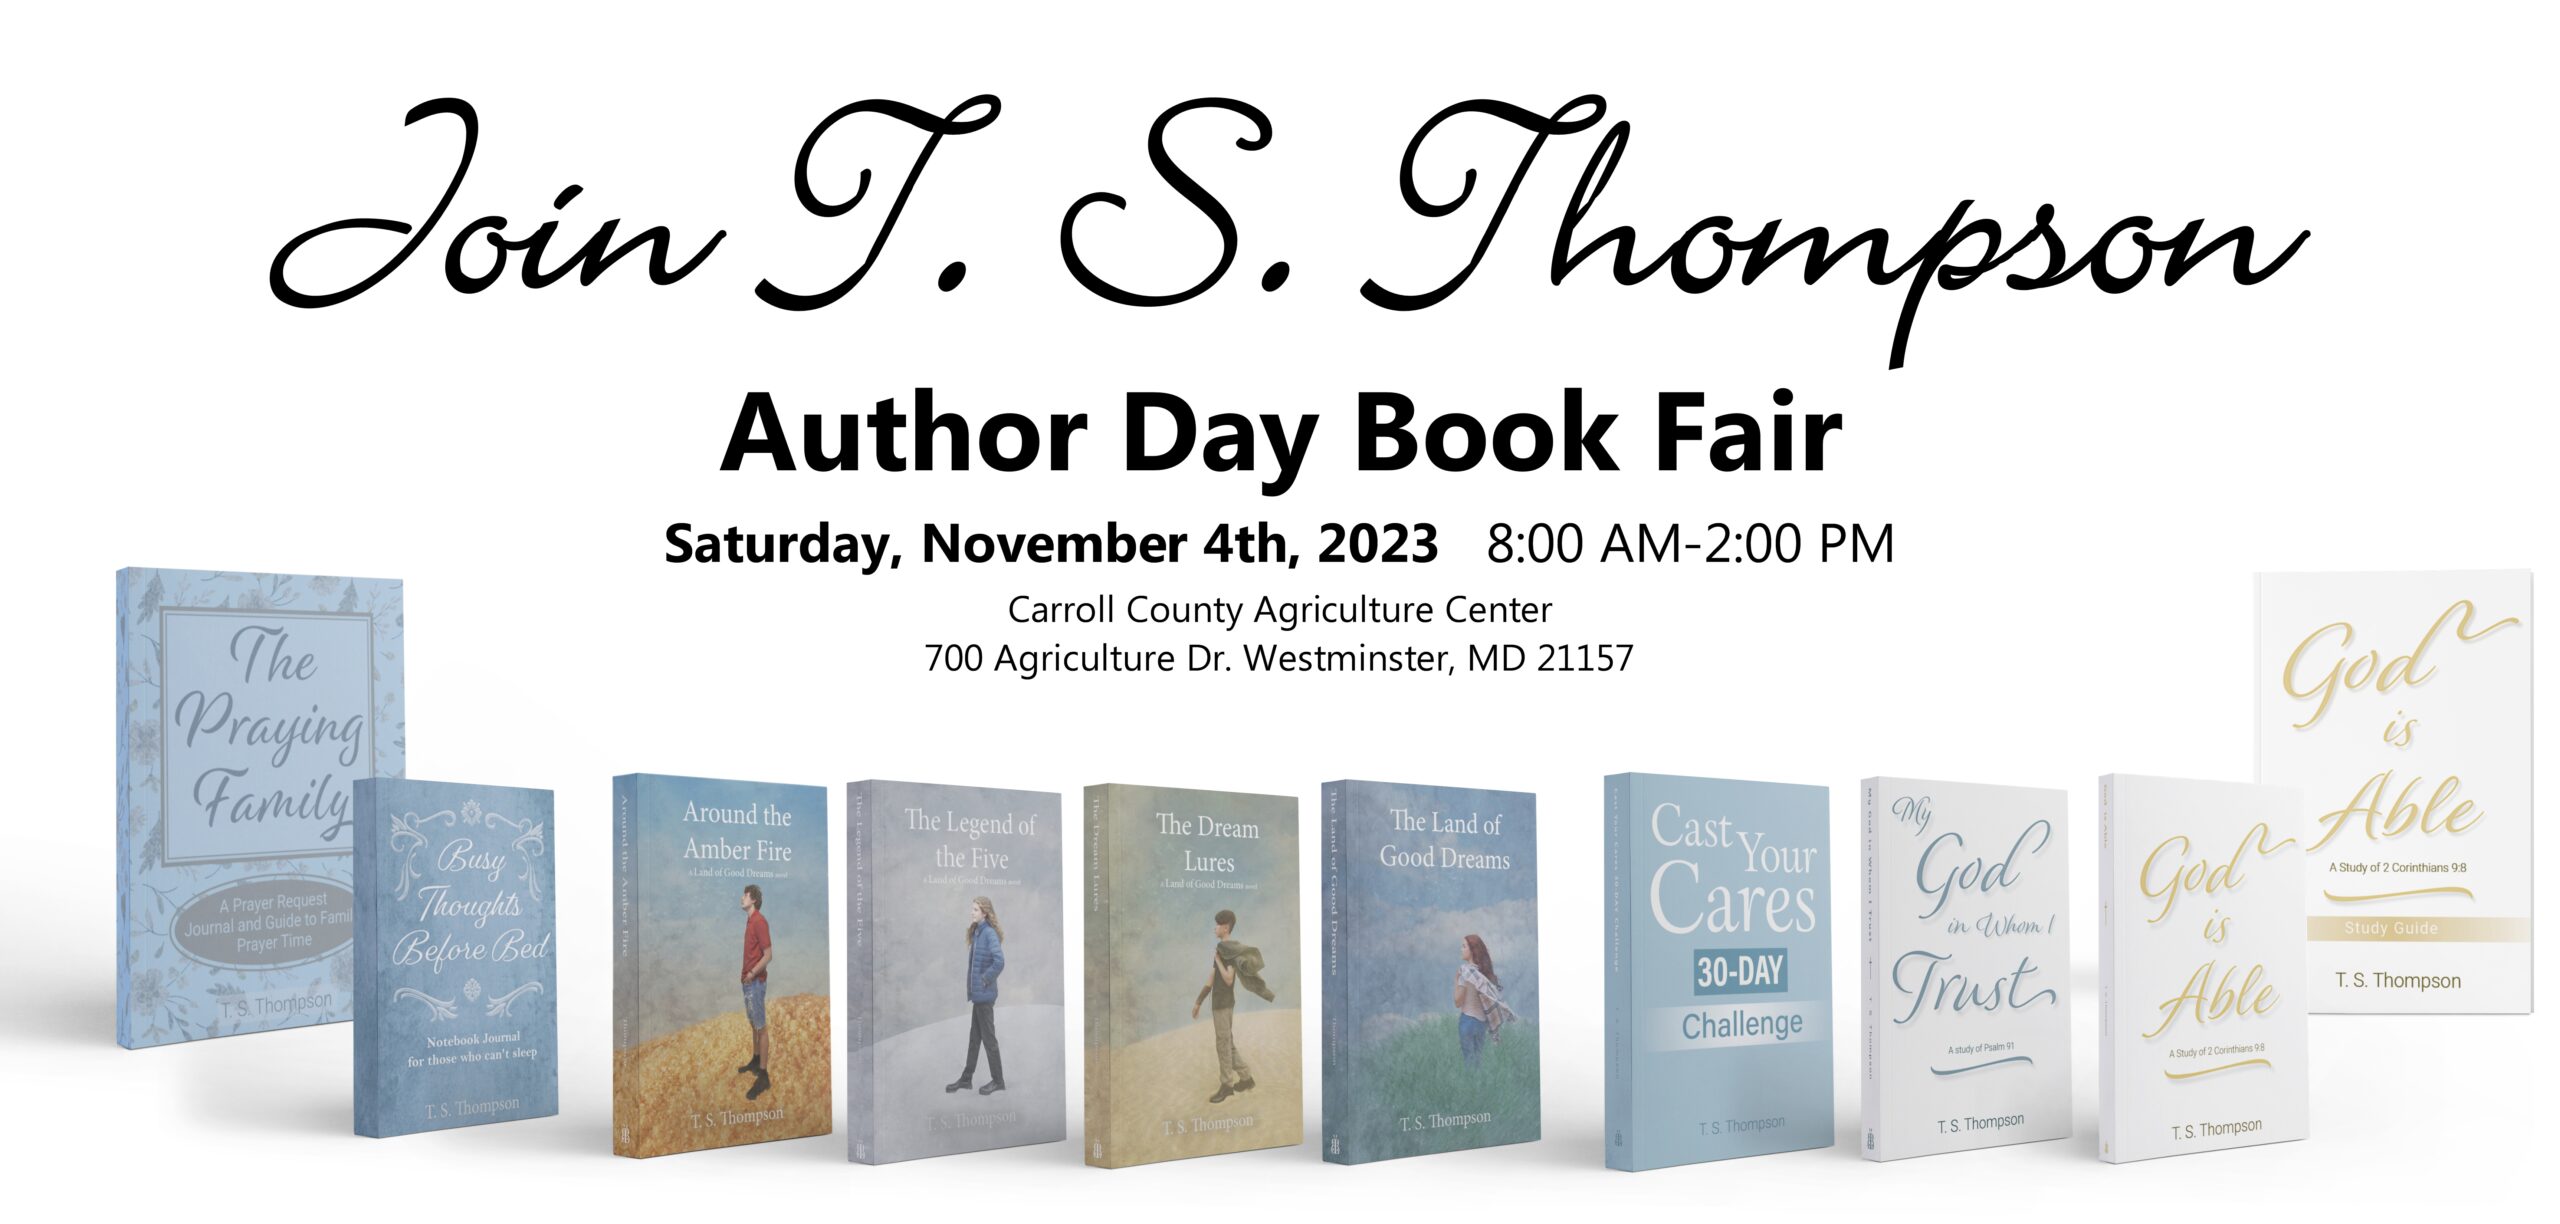 Carroll county Authors Day 2022 with T. S. Thompson